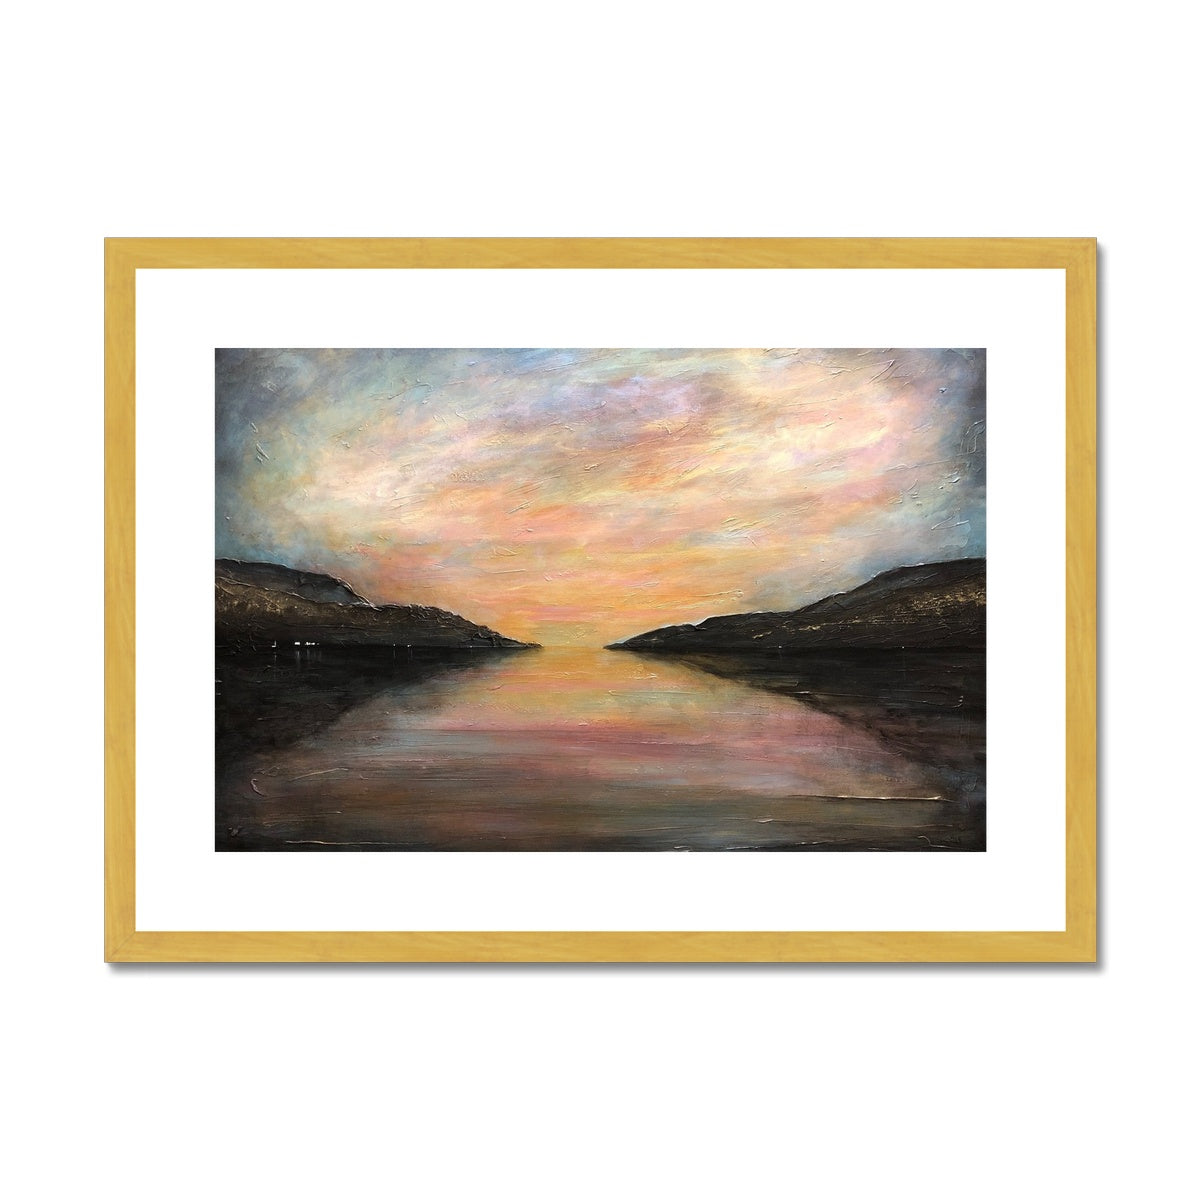 Loch Ness Glow Painting | Antique Framed & Mounted Prints From Scotland-Fine art-Scottish Lochs & Mountains Art Gallery-A2 Landscape-Gold Frame-Paintings, Prints, Homeware, Art Gifts From Scotland By Scottish Artist Kevin Hunter